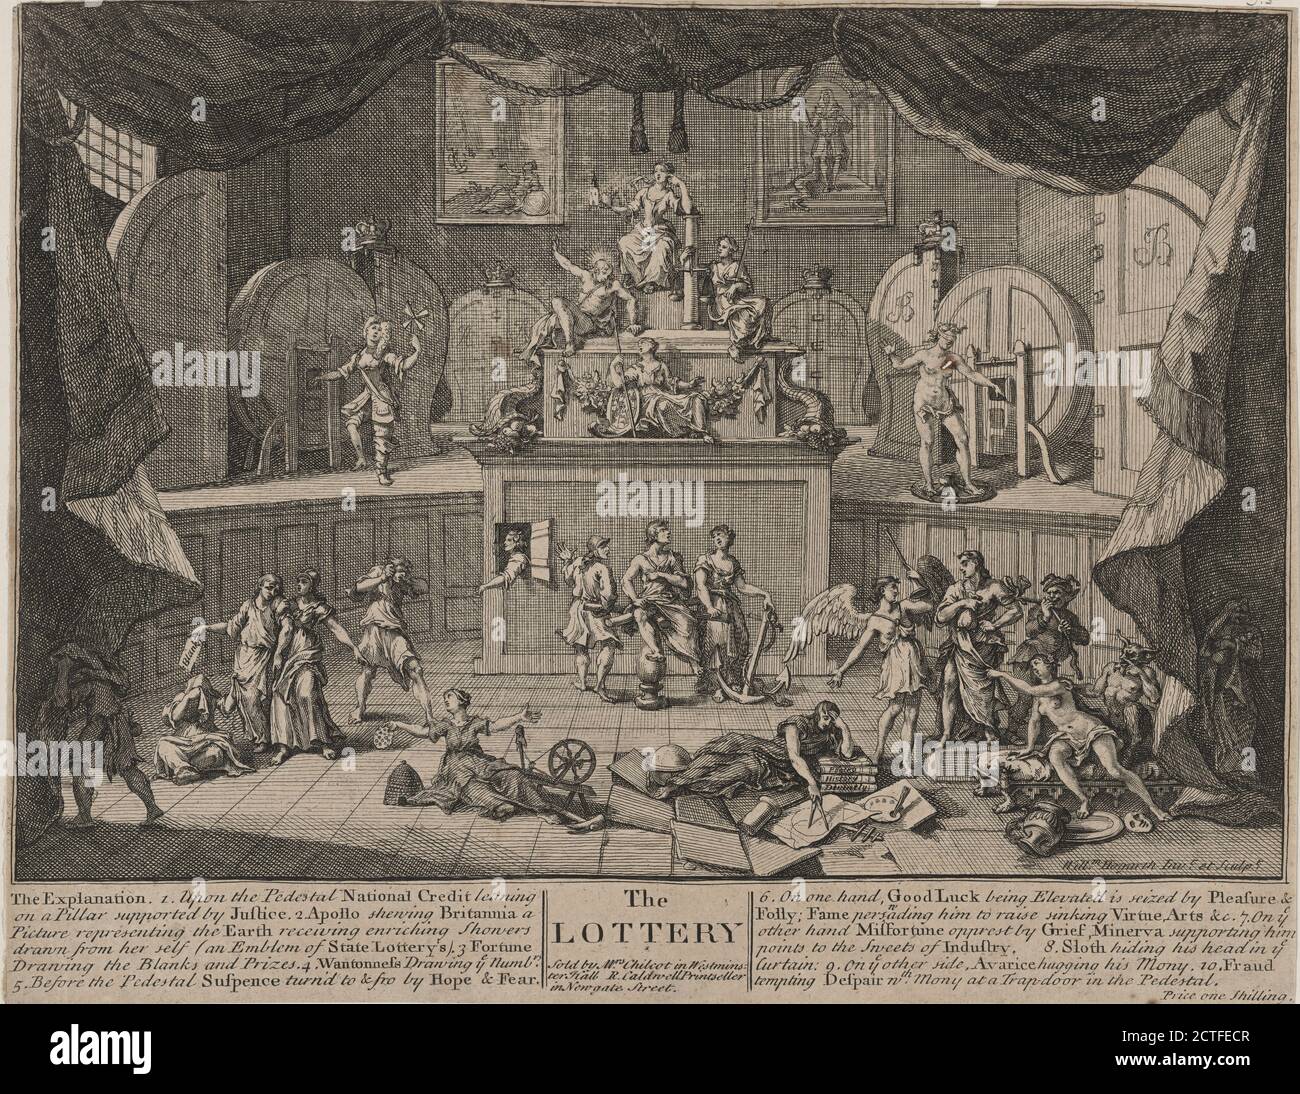 The Lottery, STILL image, Prints, 1724, Hogarth, William, 1697-1764 Banque D'Images